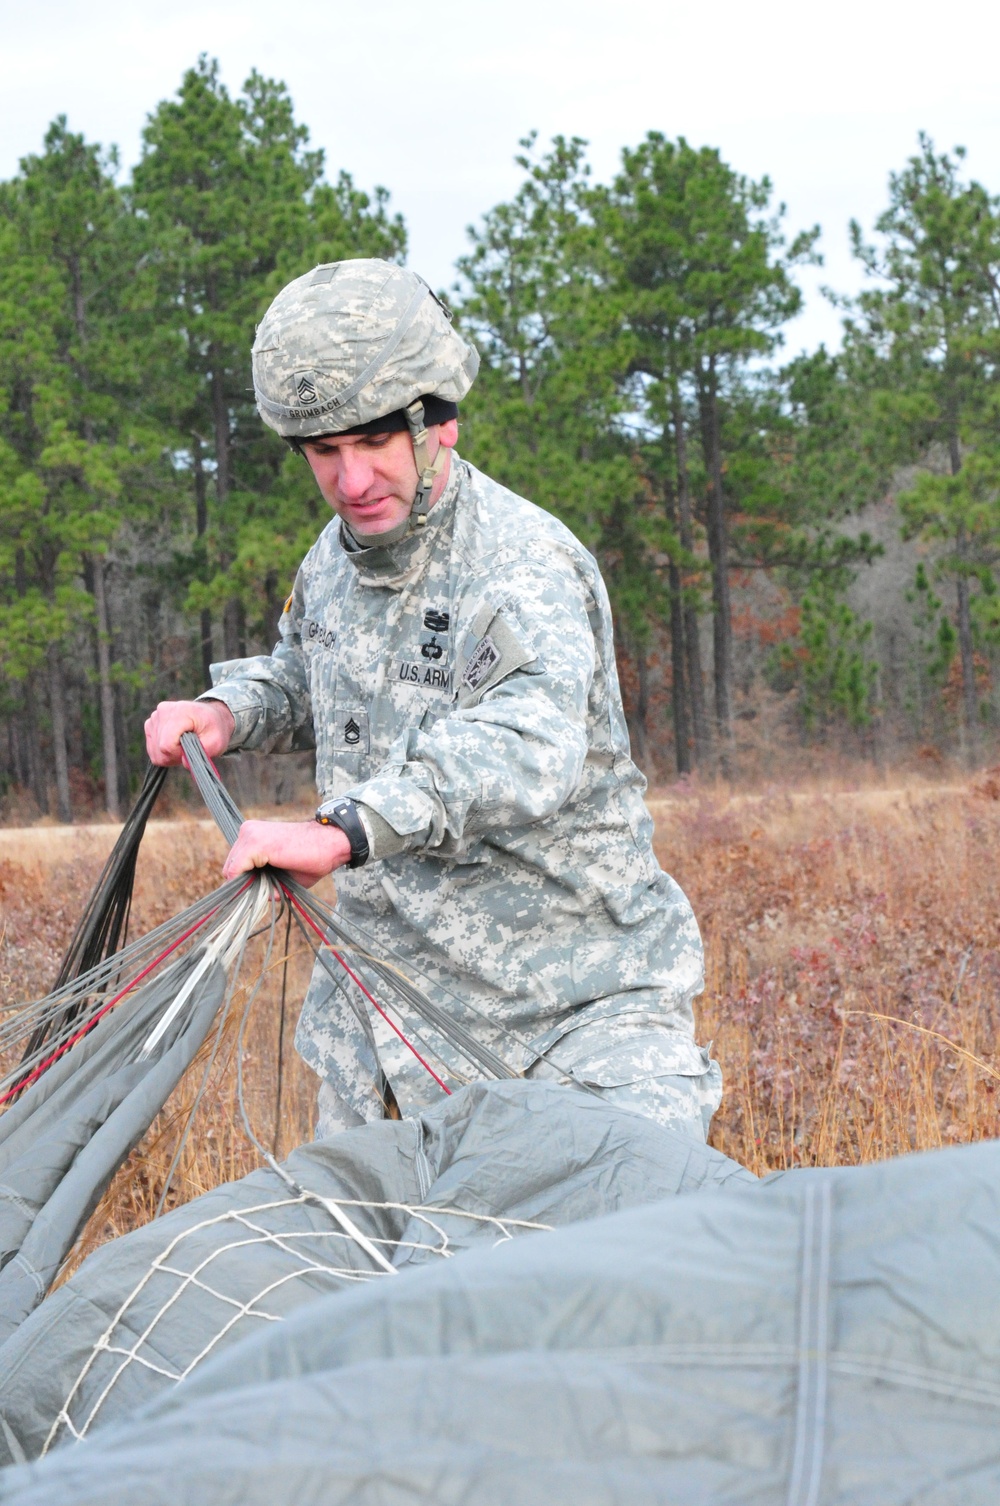 US Army paratrooper recovers parachute